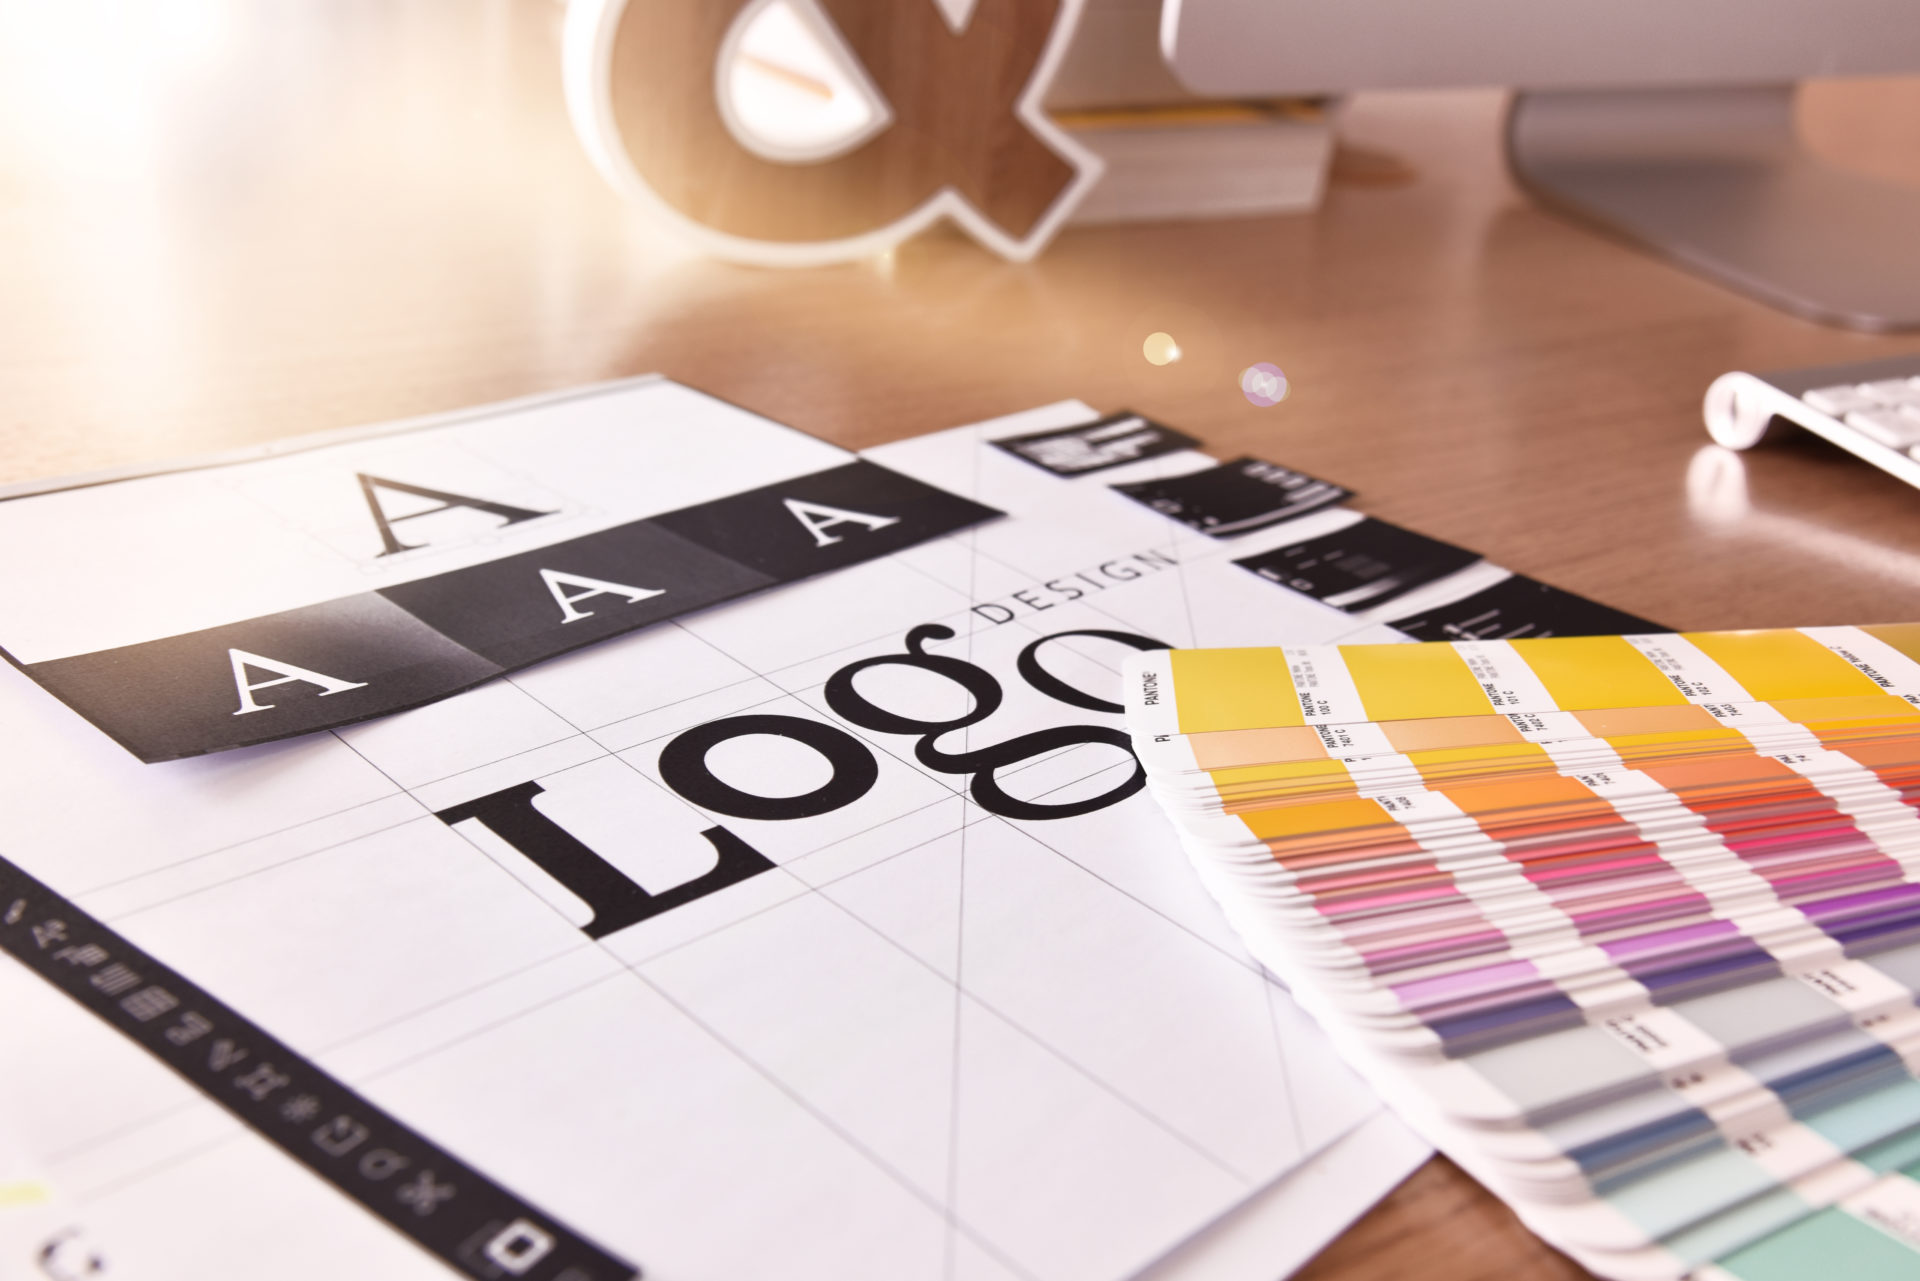 How to design a great logo for your small business